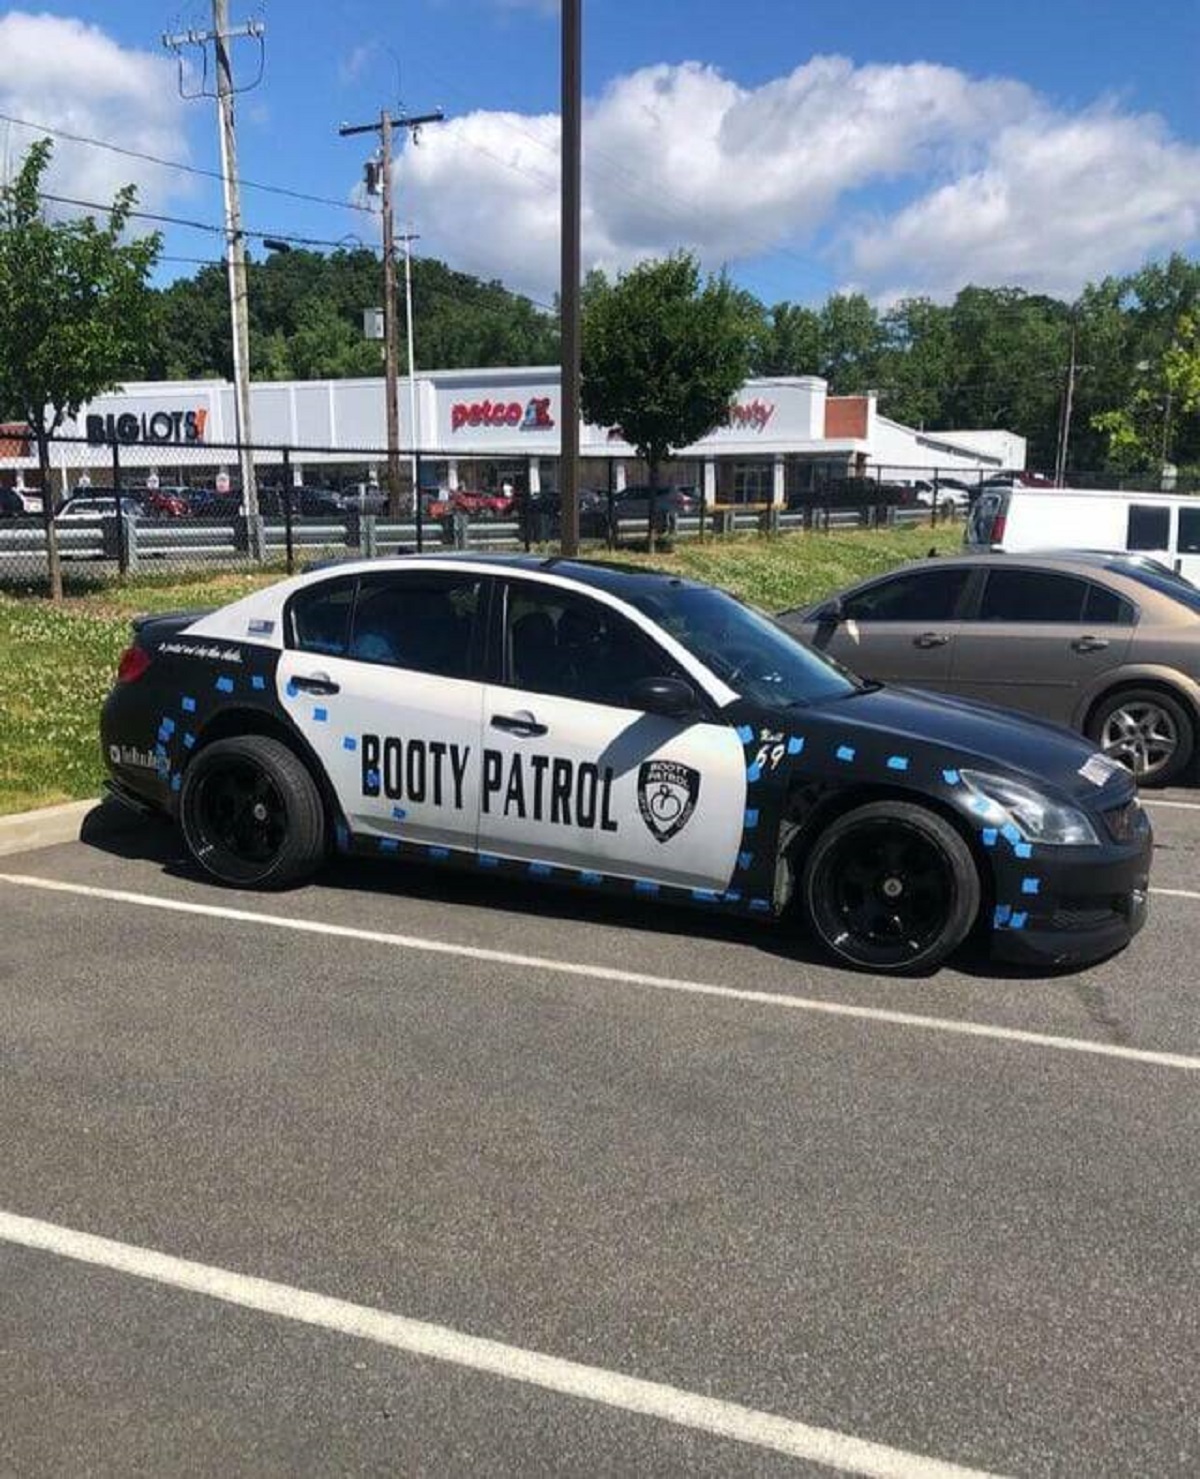 "This “police car” that’s been sitting outside my work."